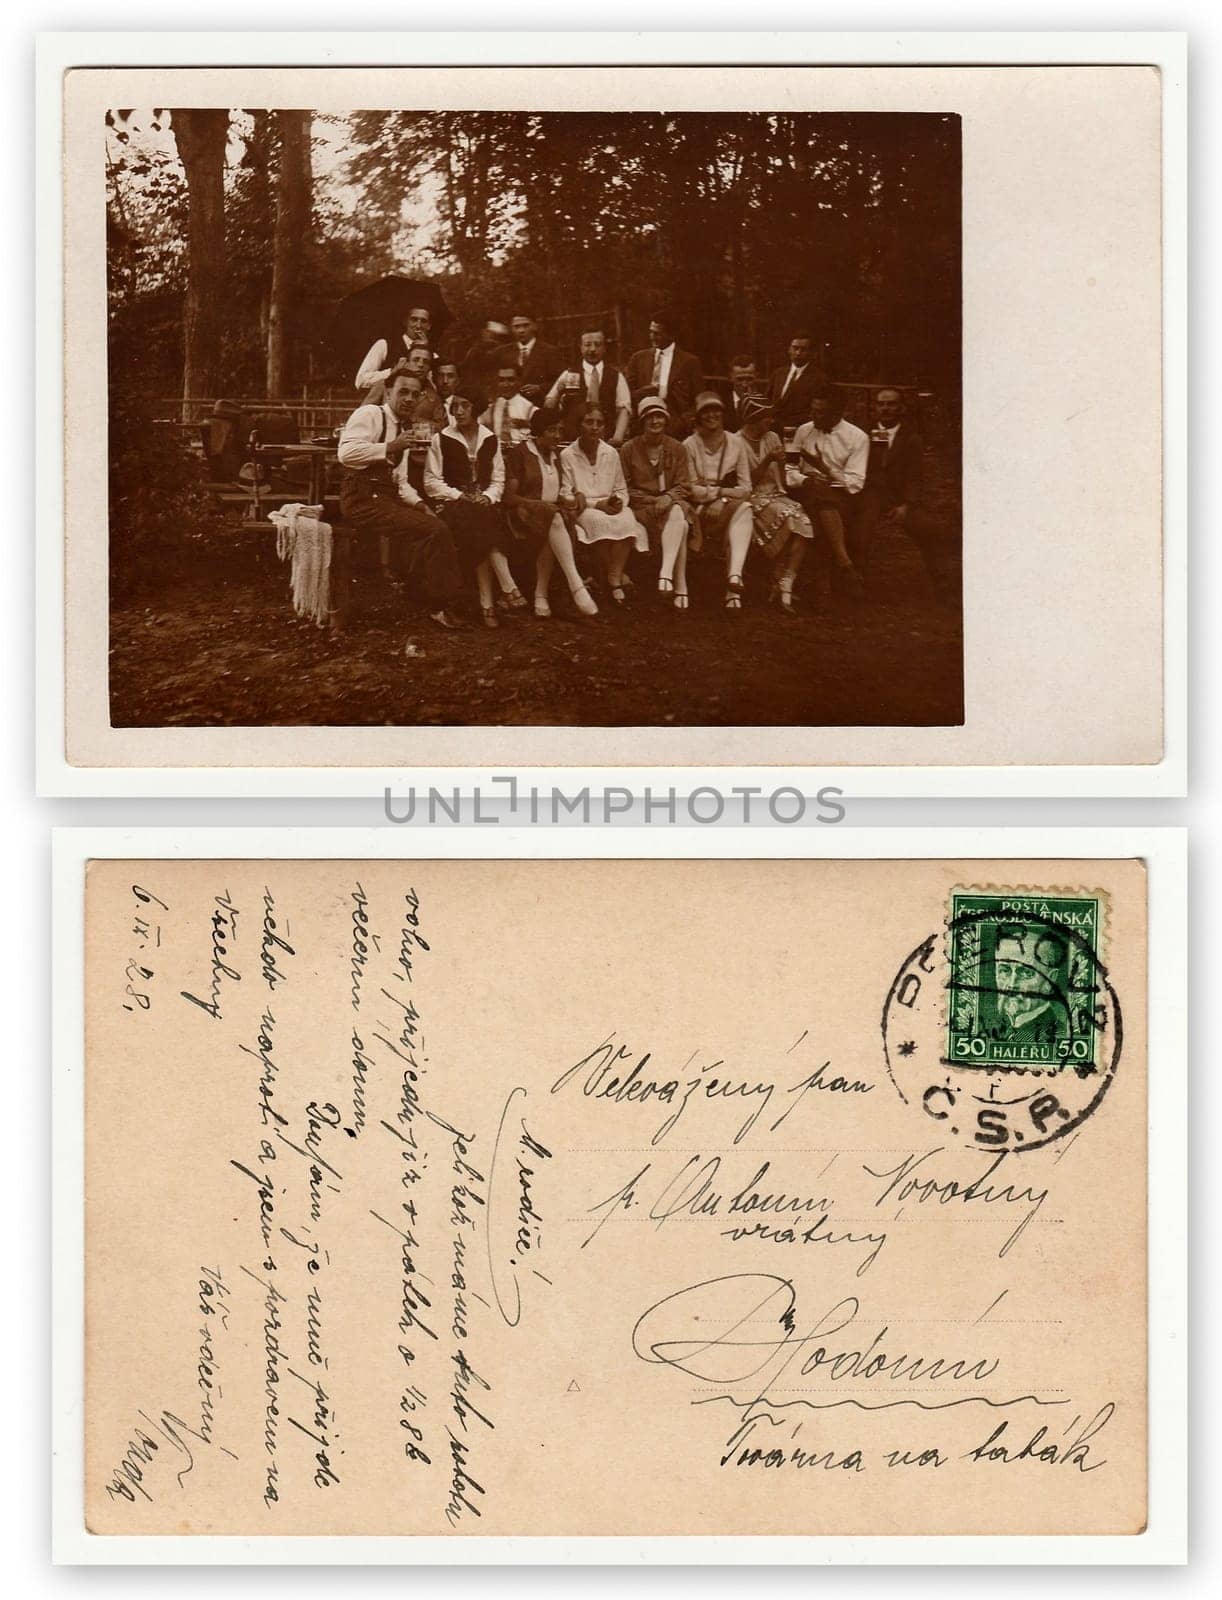 Front and back of vintage photo. Vintage photo shows group of people in nature, circa 1930s by roman_nerud